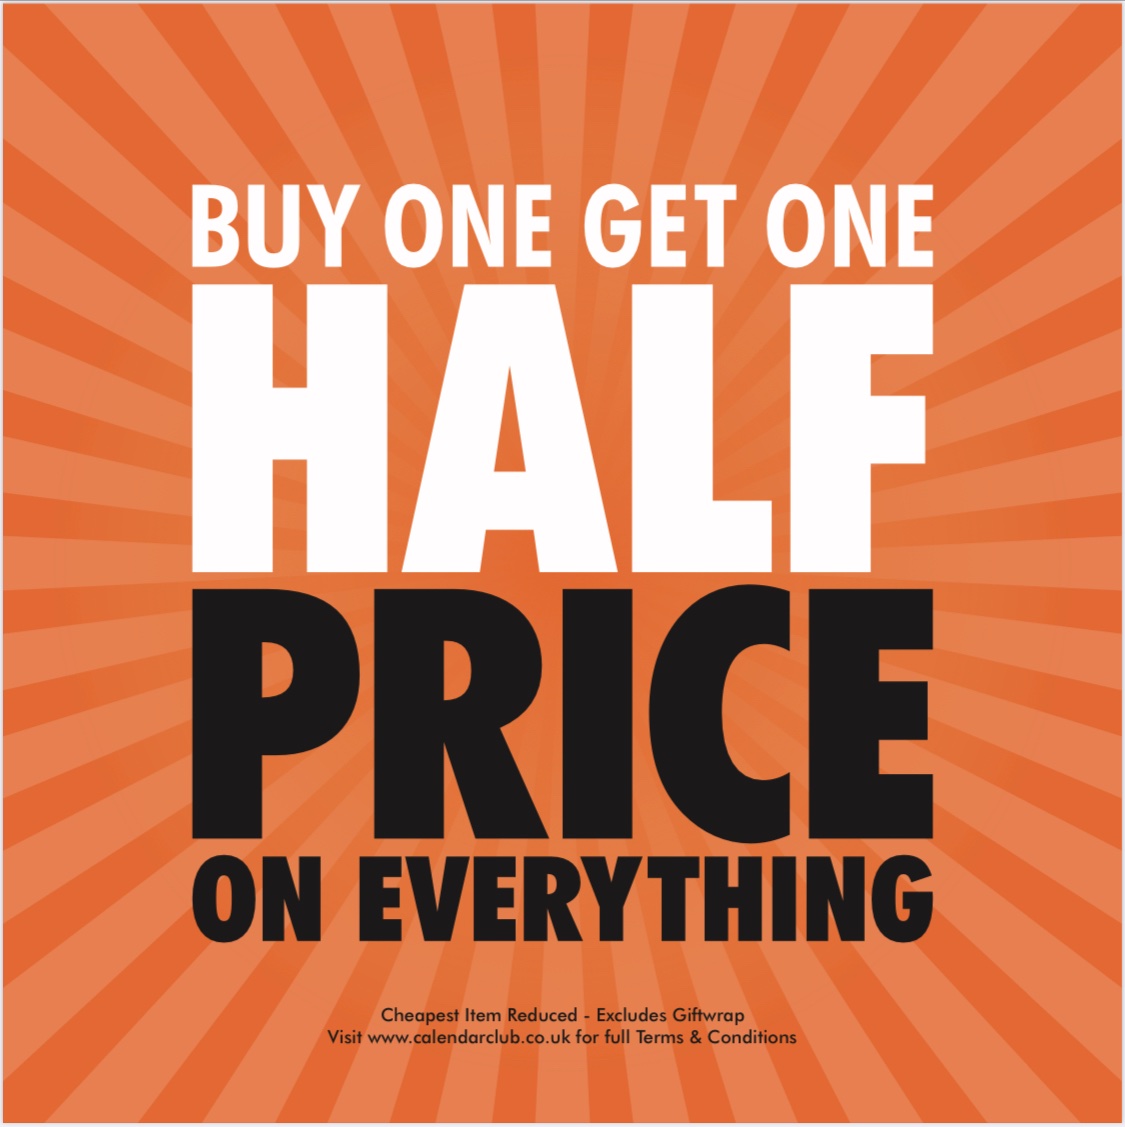 Buy One Get One Half Price with Calendar Club this weekend. 🗓 Offer available on all their products (cheapest item reduced, excluding gift wrap). Terms and conditions apply. Visit their website for more information.